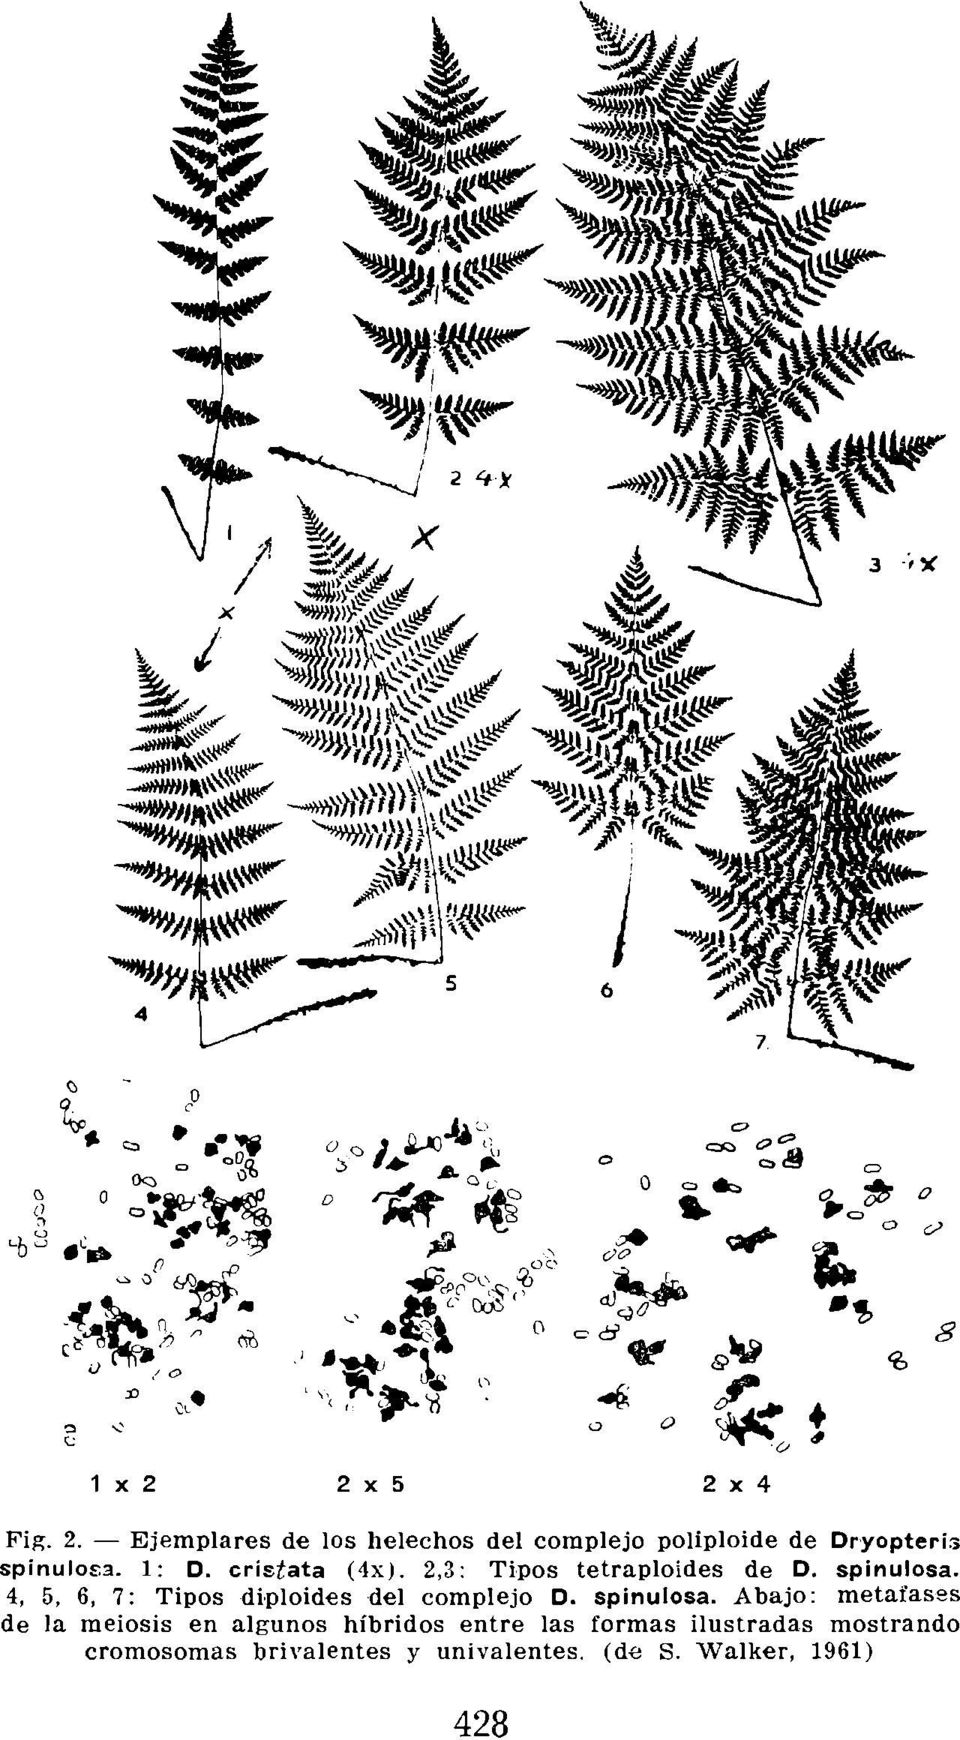 4, 5, 6, 7: Tipos diploides del complejo D. spinulosa.